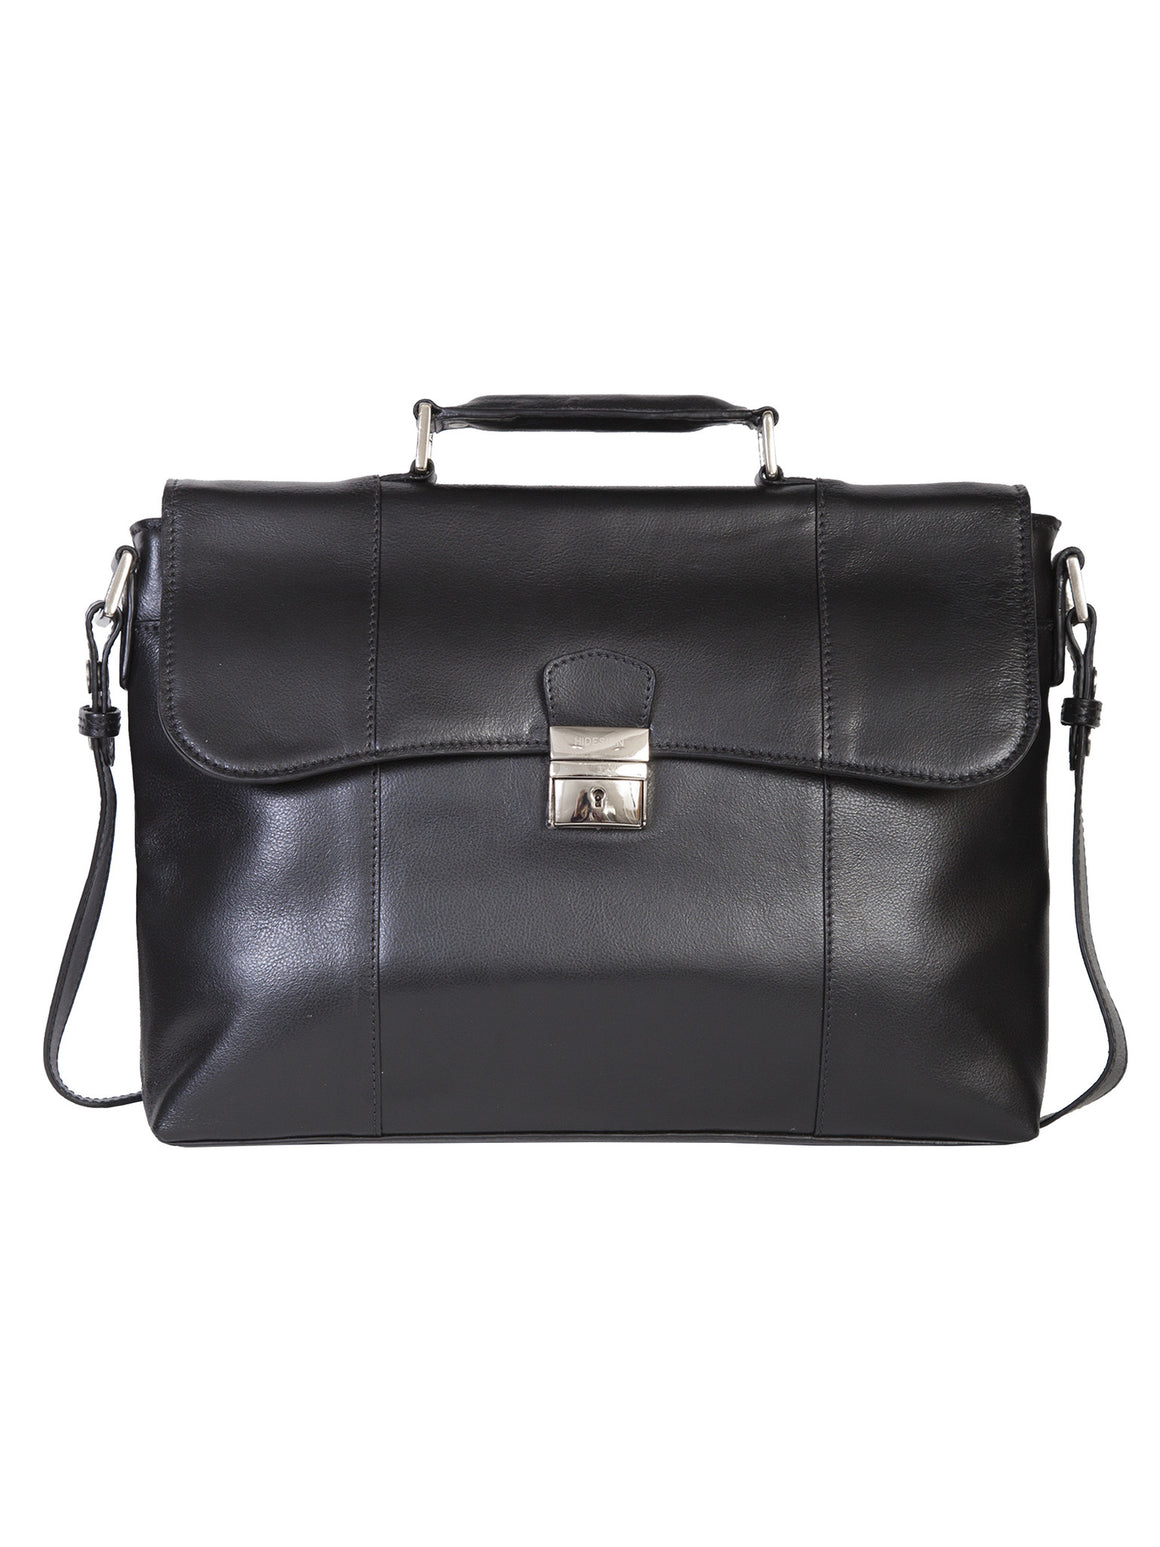 Scully Hidesign Leather Corporate Slim Brief Bag with Strap Black